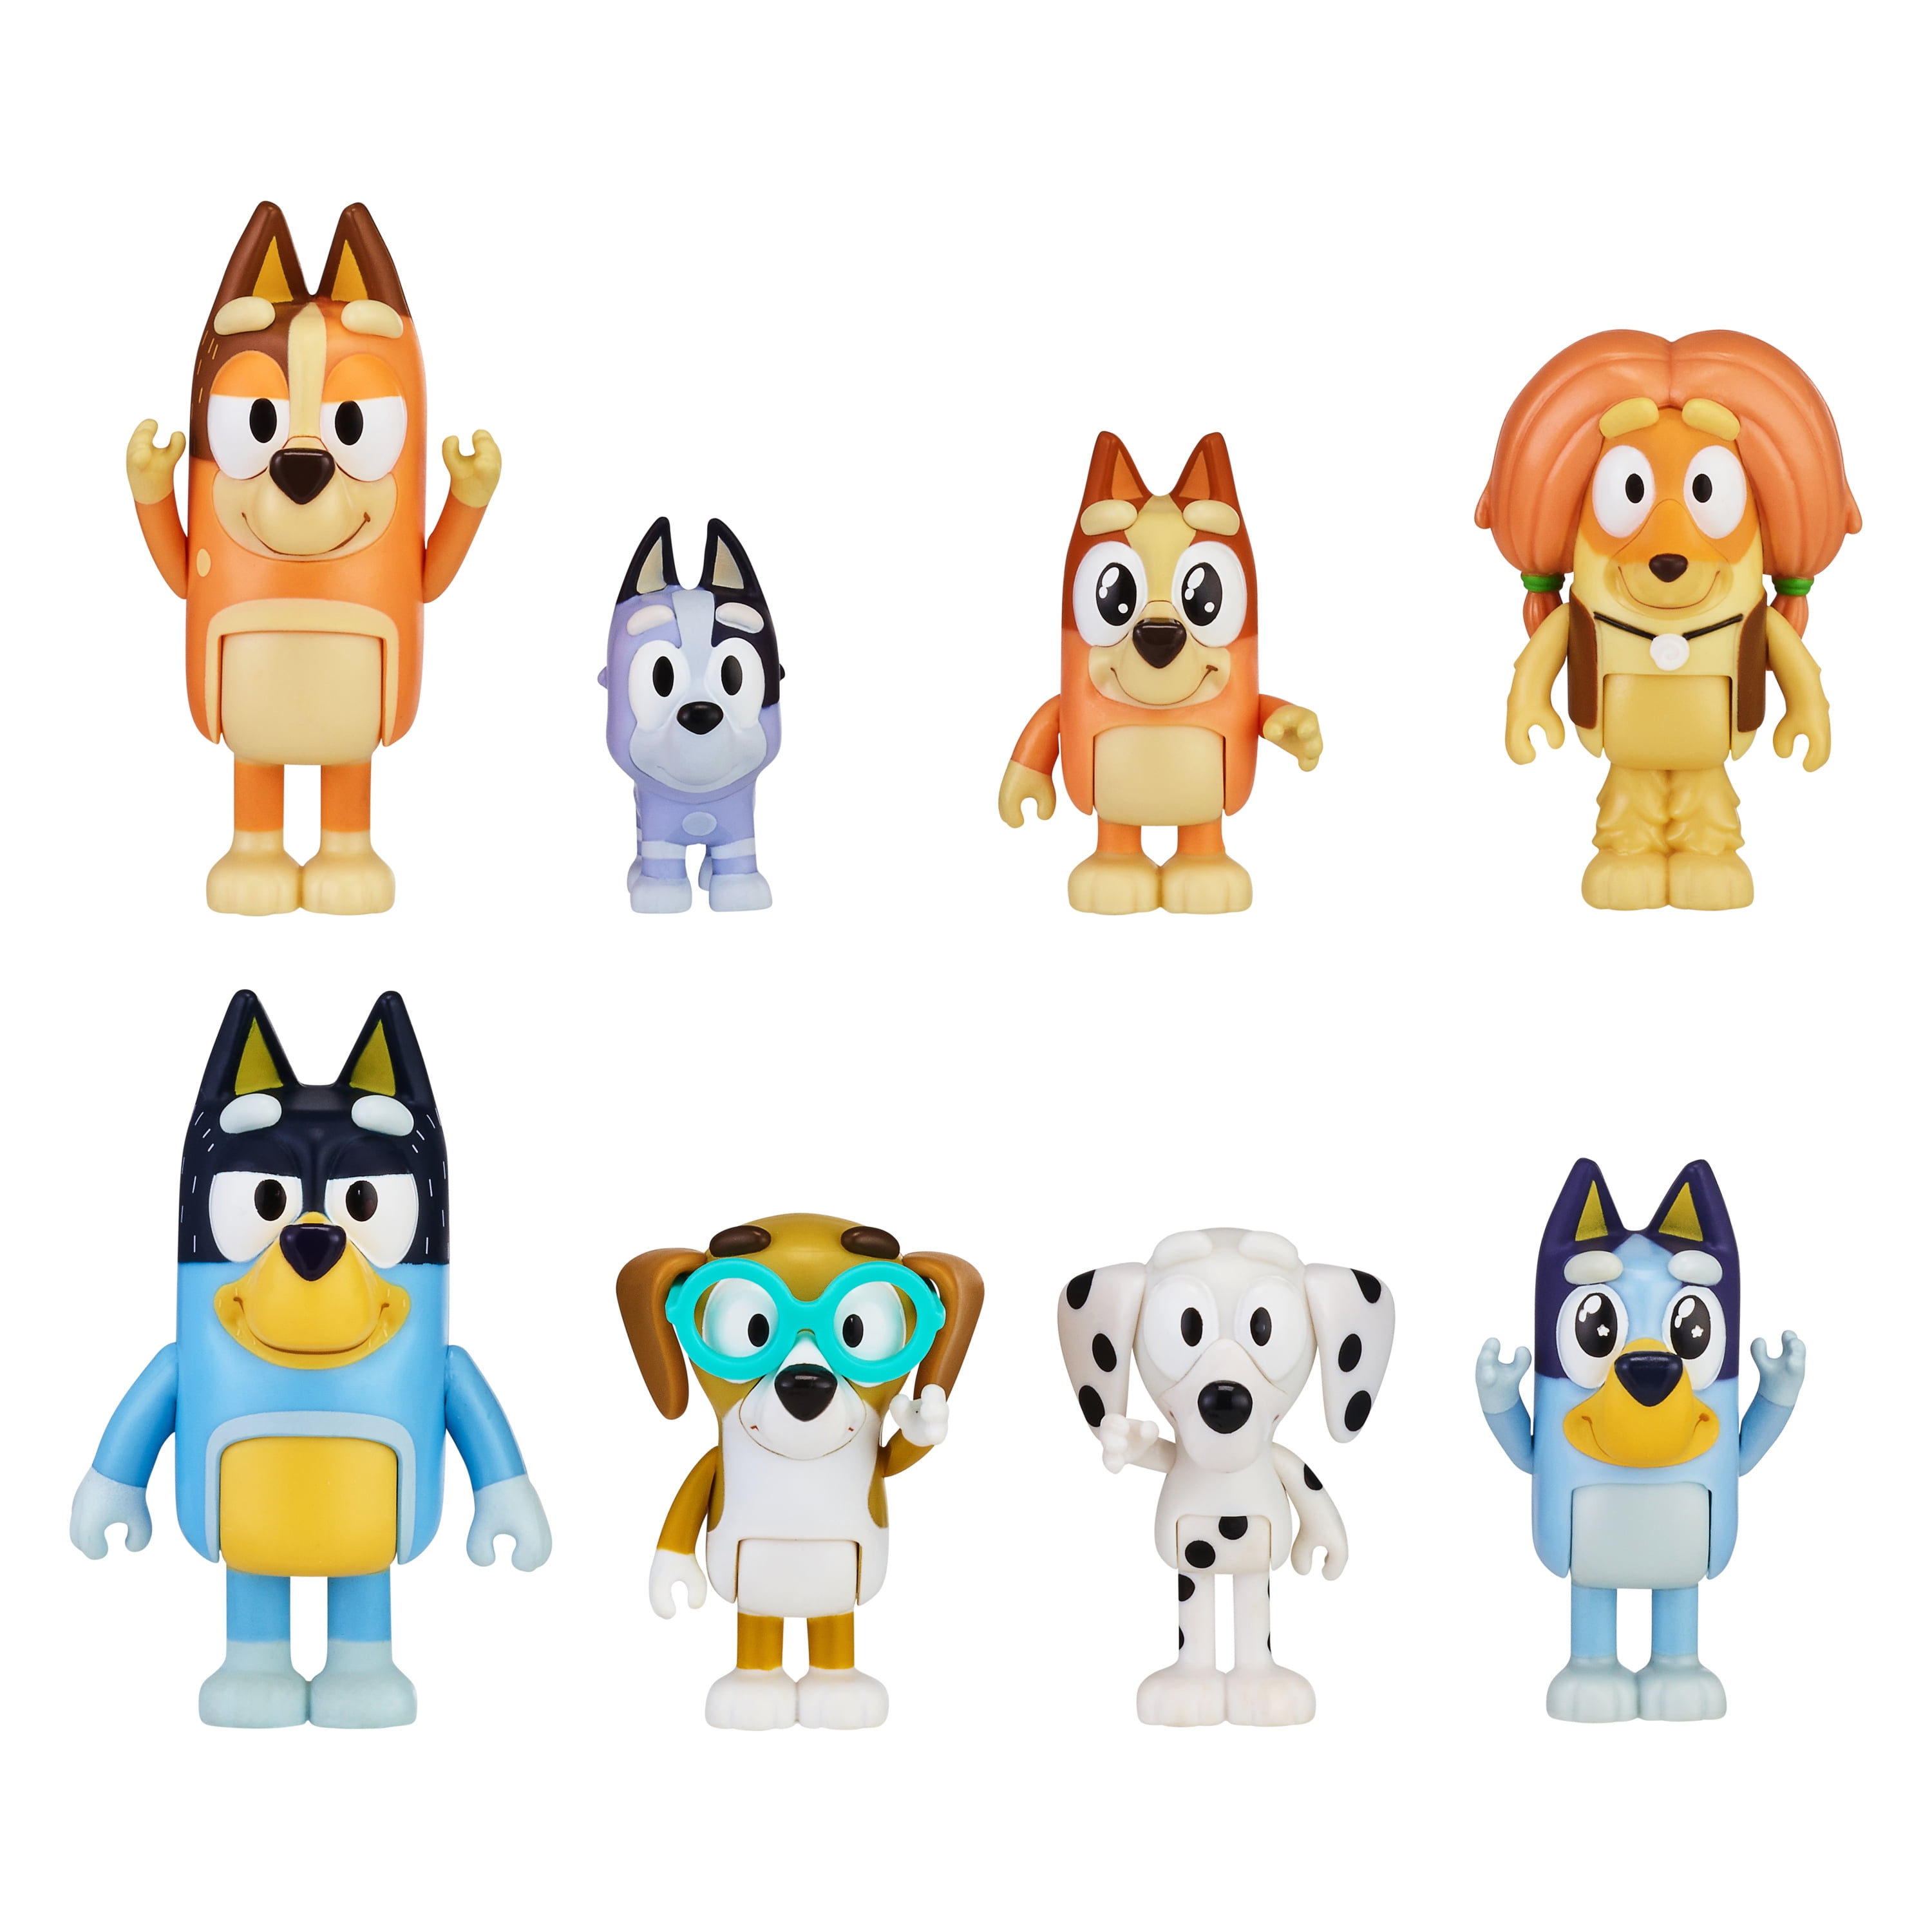 Bluey's Family and Friends - 8 Pack - 2.5-3" Bluey, Bingo, Chilli (Mum) and  Dad (Bandit), Honey, Socks, Chloe and Indy Figures - Walmart.com